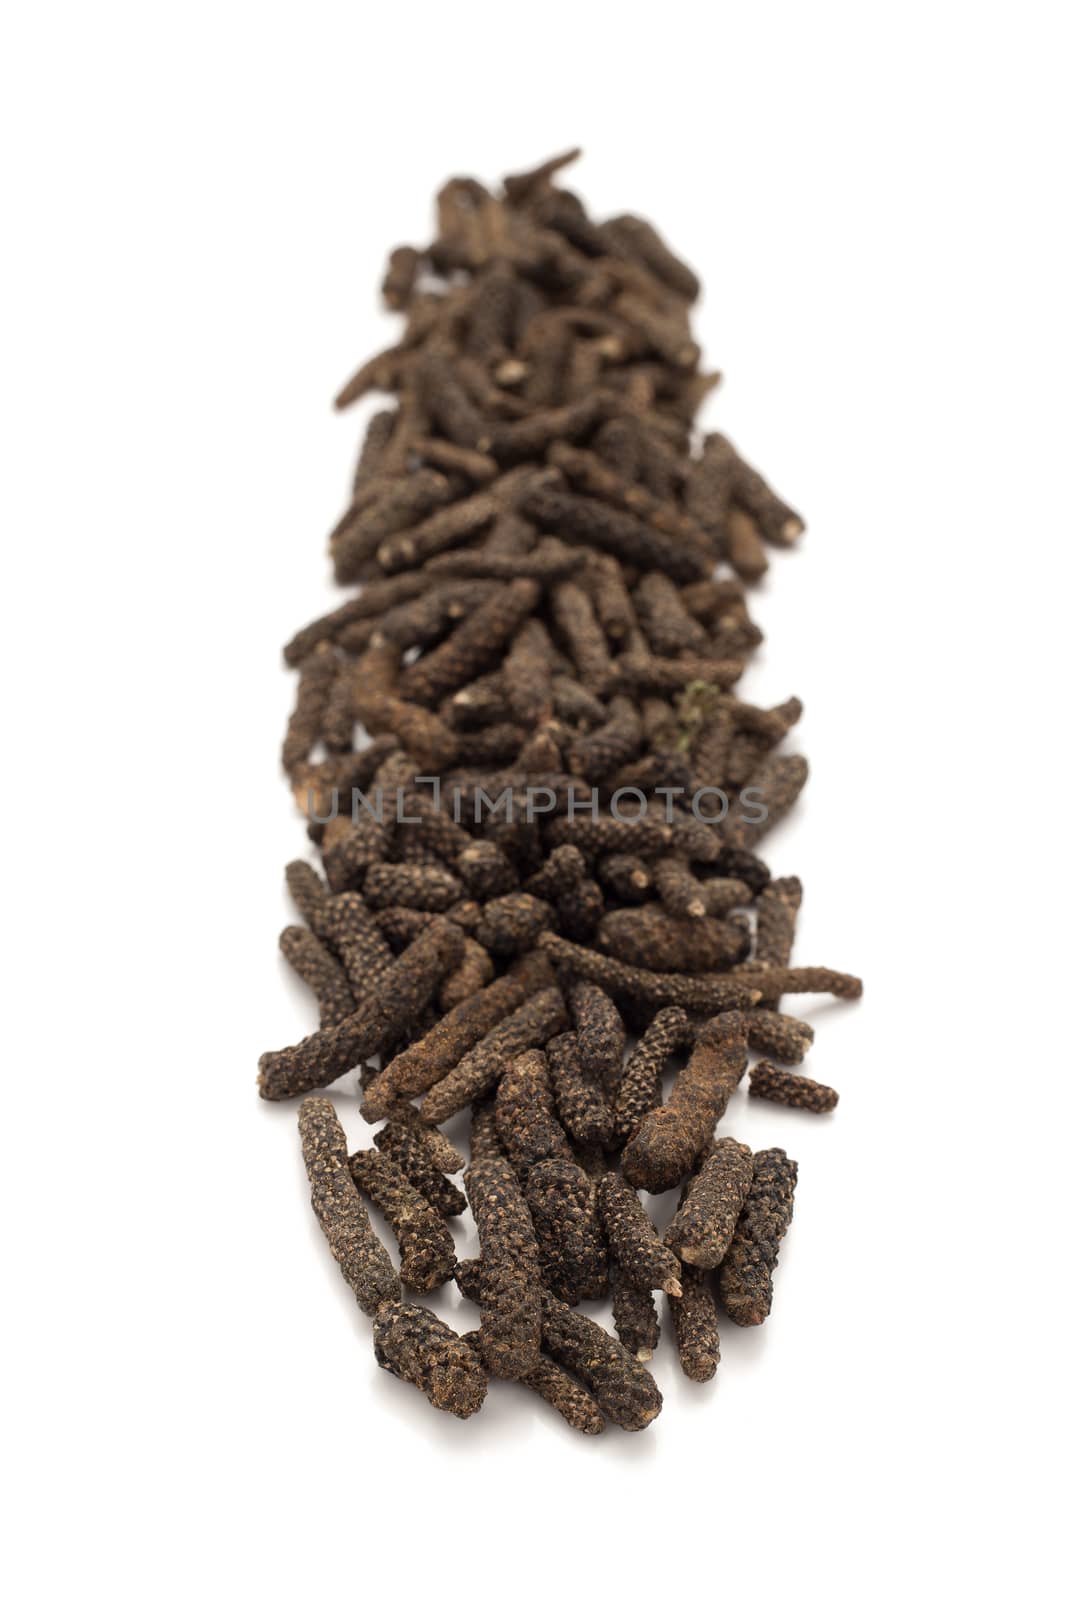 Row of Organic Long pepper Dried Fruit (Piper longum) isolated on white background.